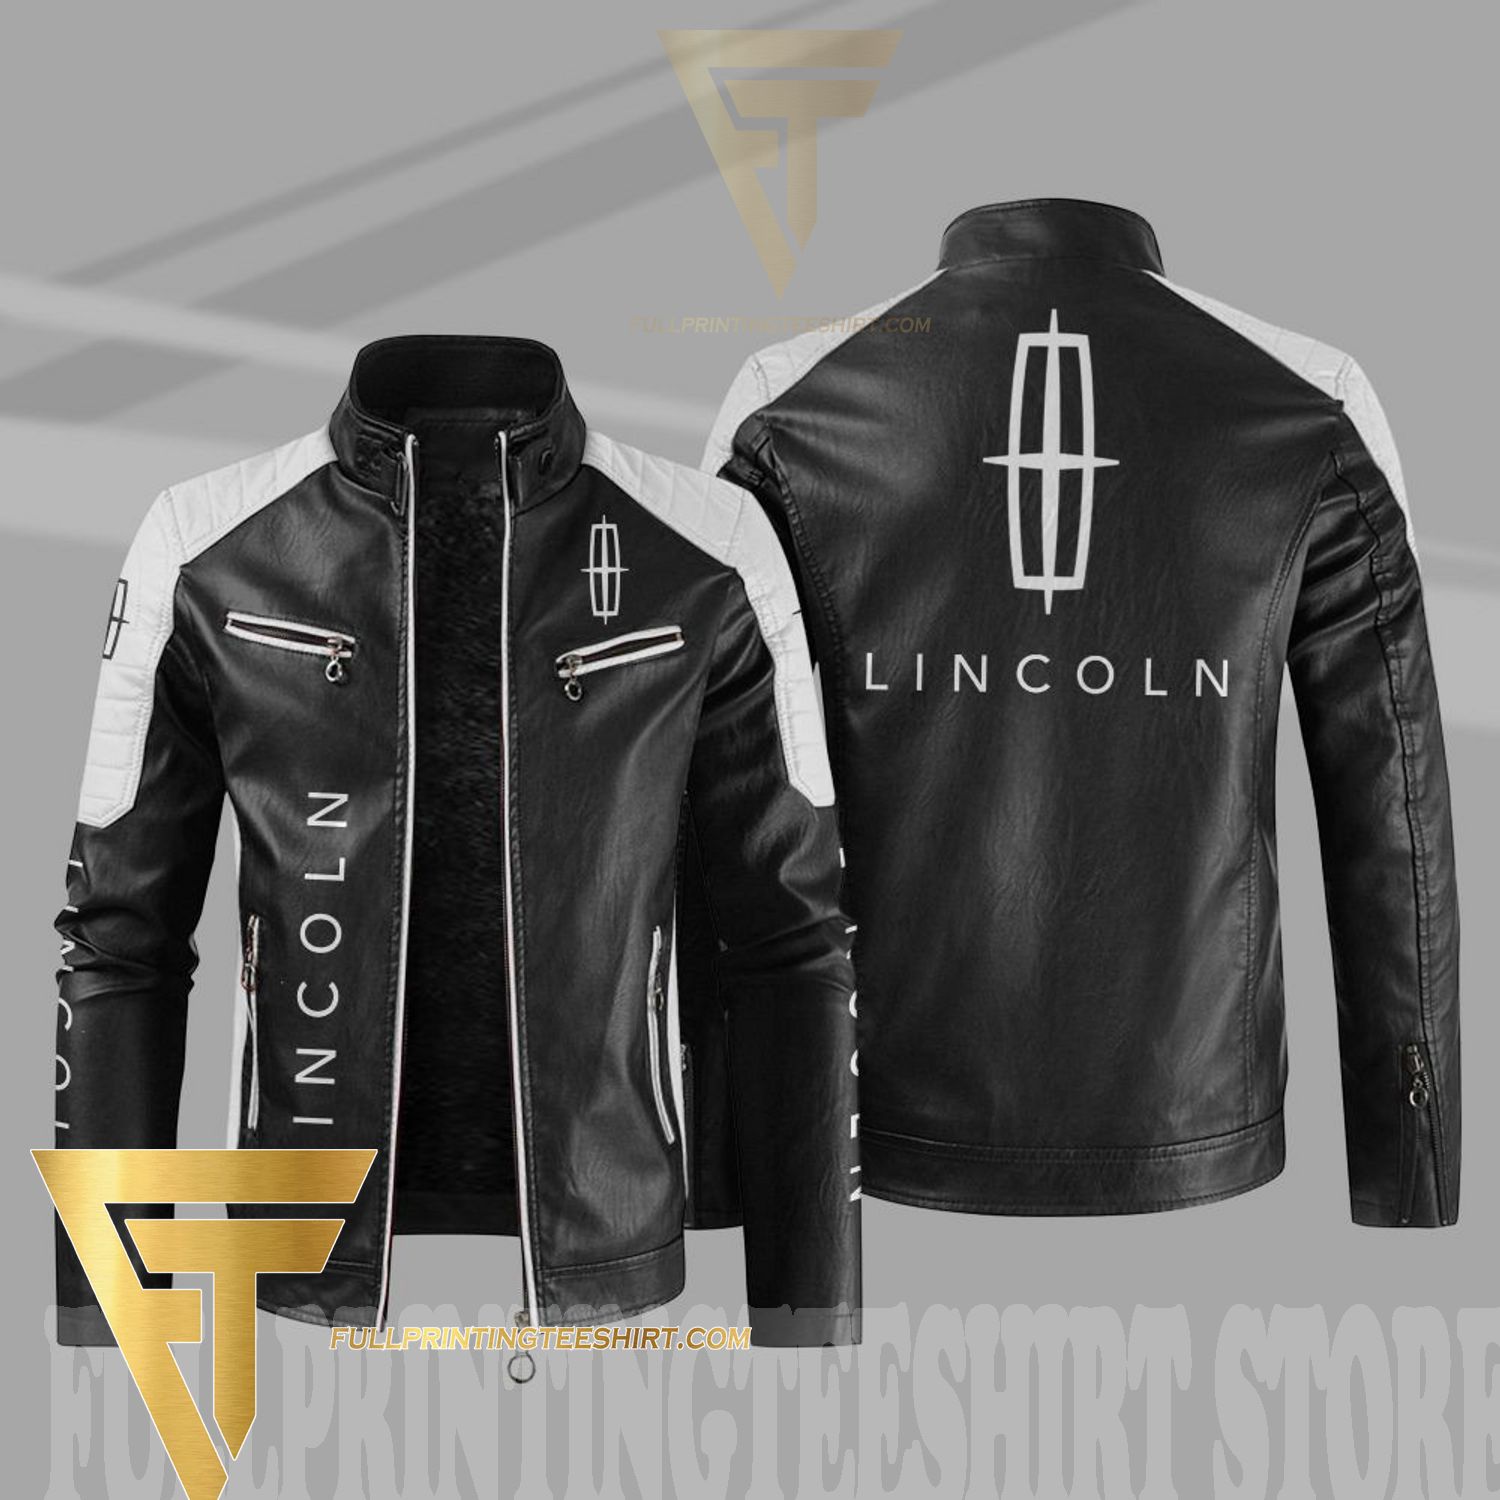 Top-selling item] Lincoln Car Symbol All Over Print Jacket